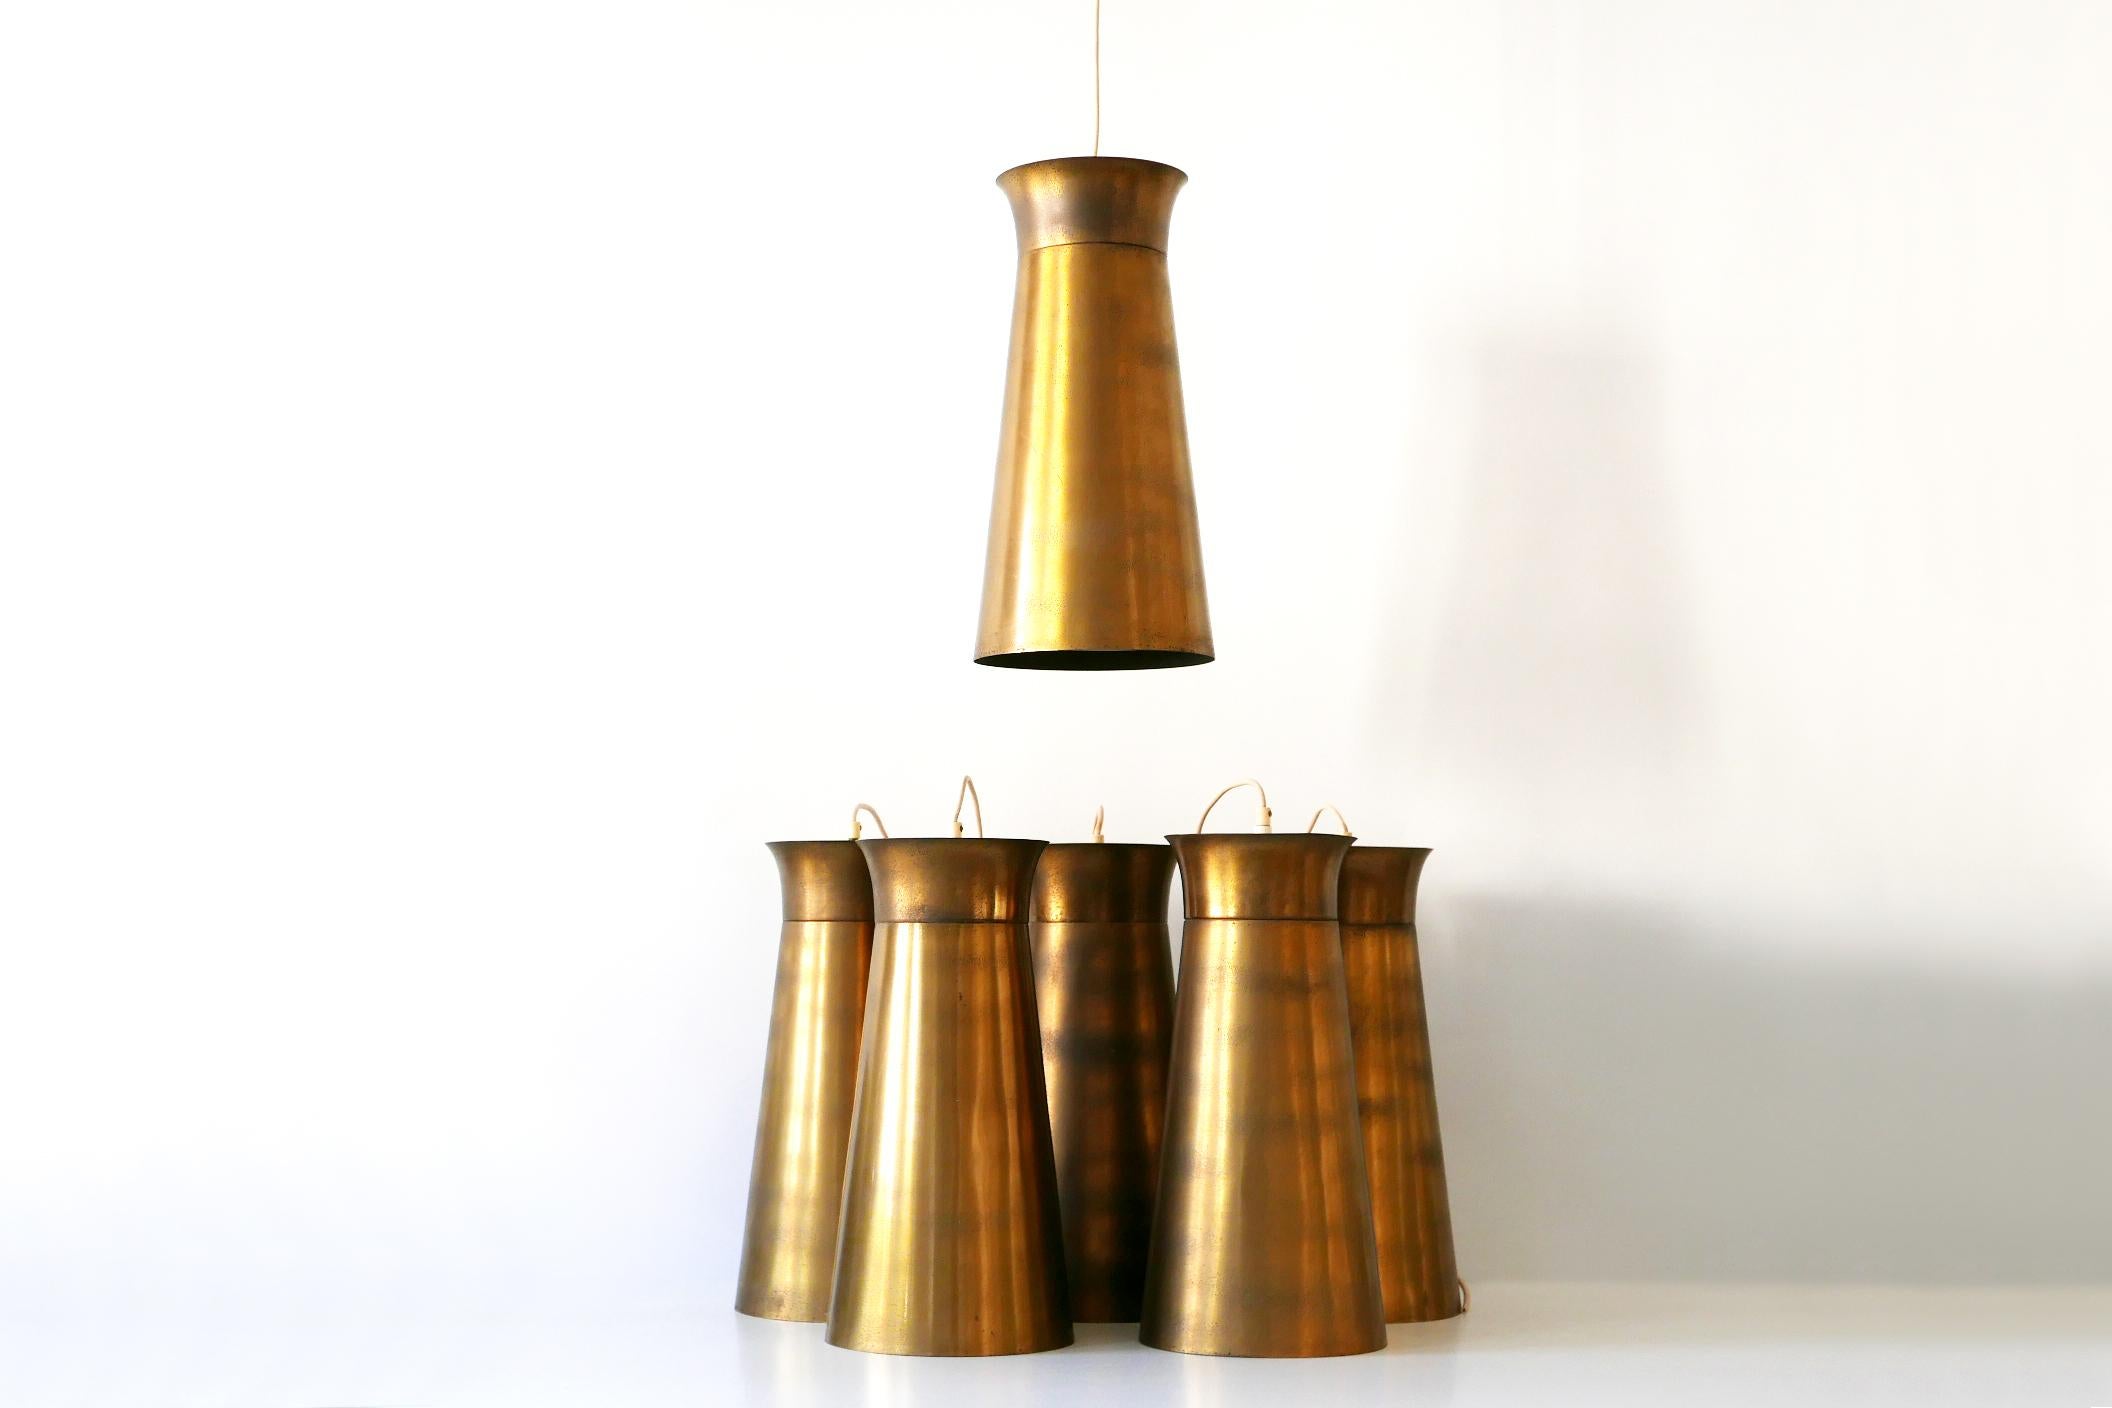 Elegant Mid-Century Modern Brass Pendant Lamps or Hanging Lights, 1950s, Germany For Sale 1